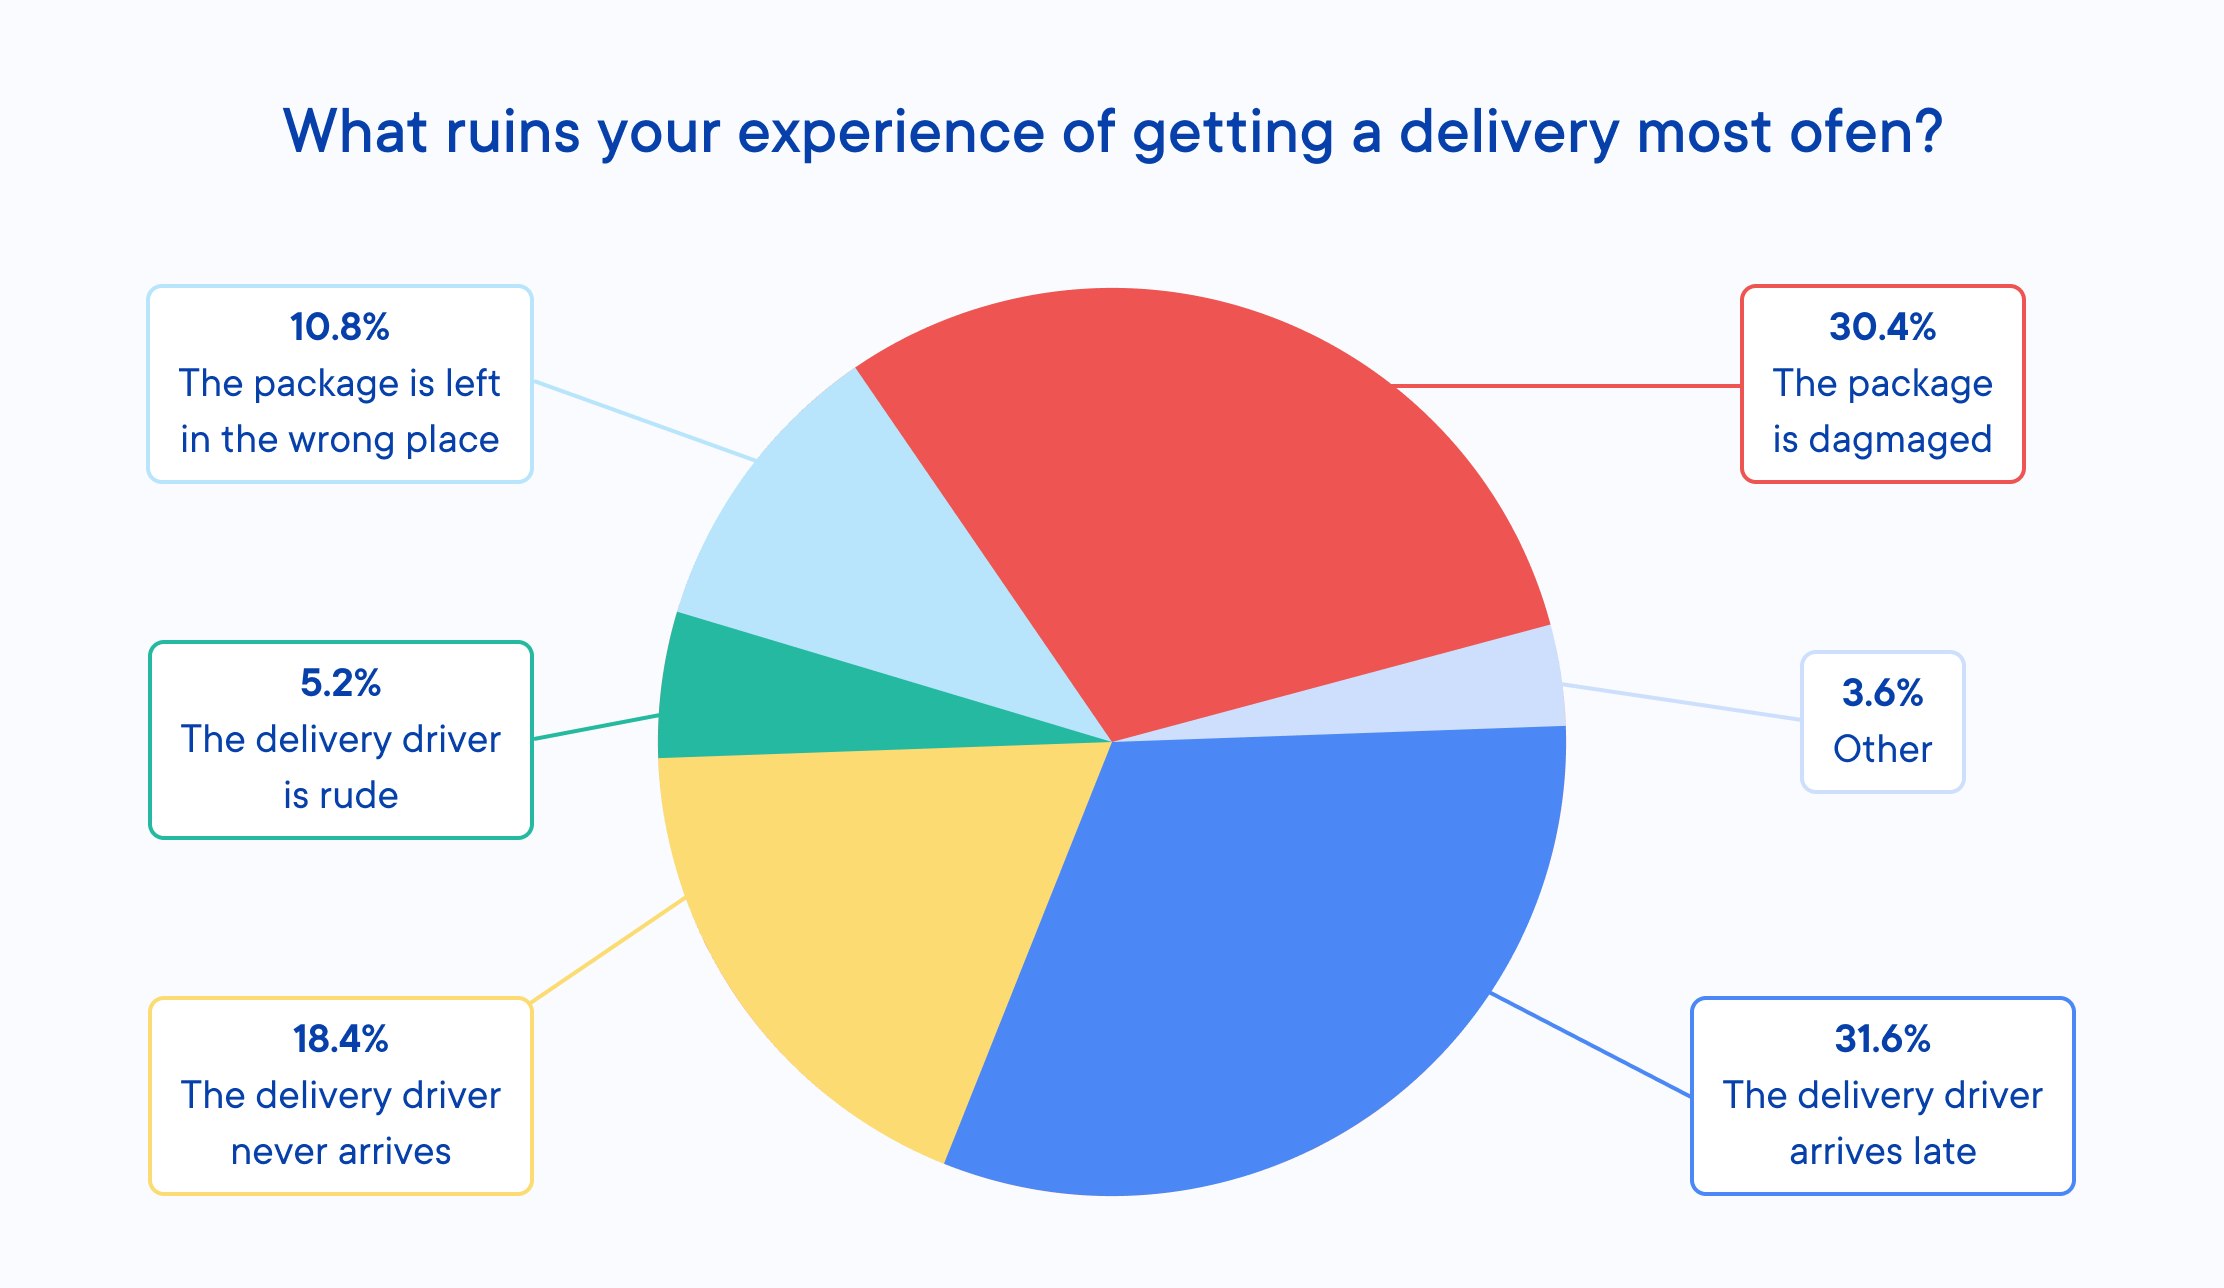 Graph showing what ruins customers' experience of getting a delivery most ofen.